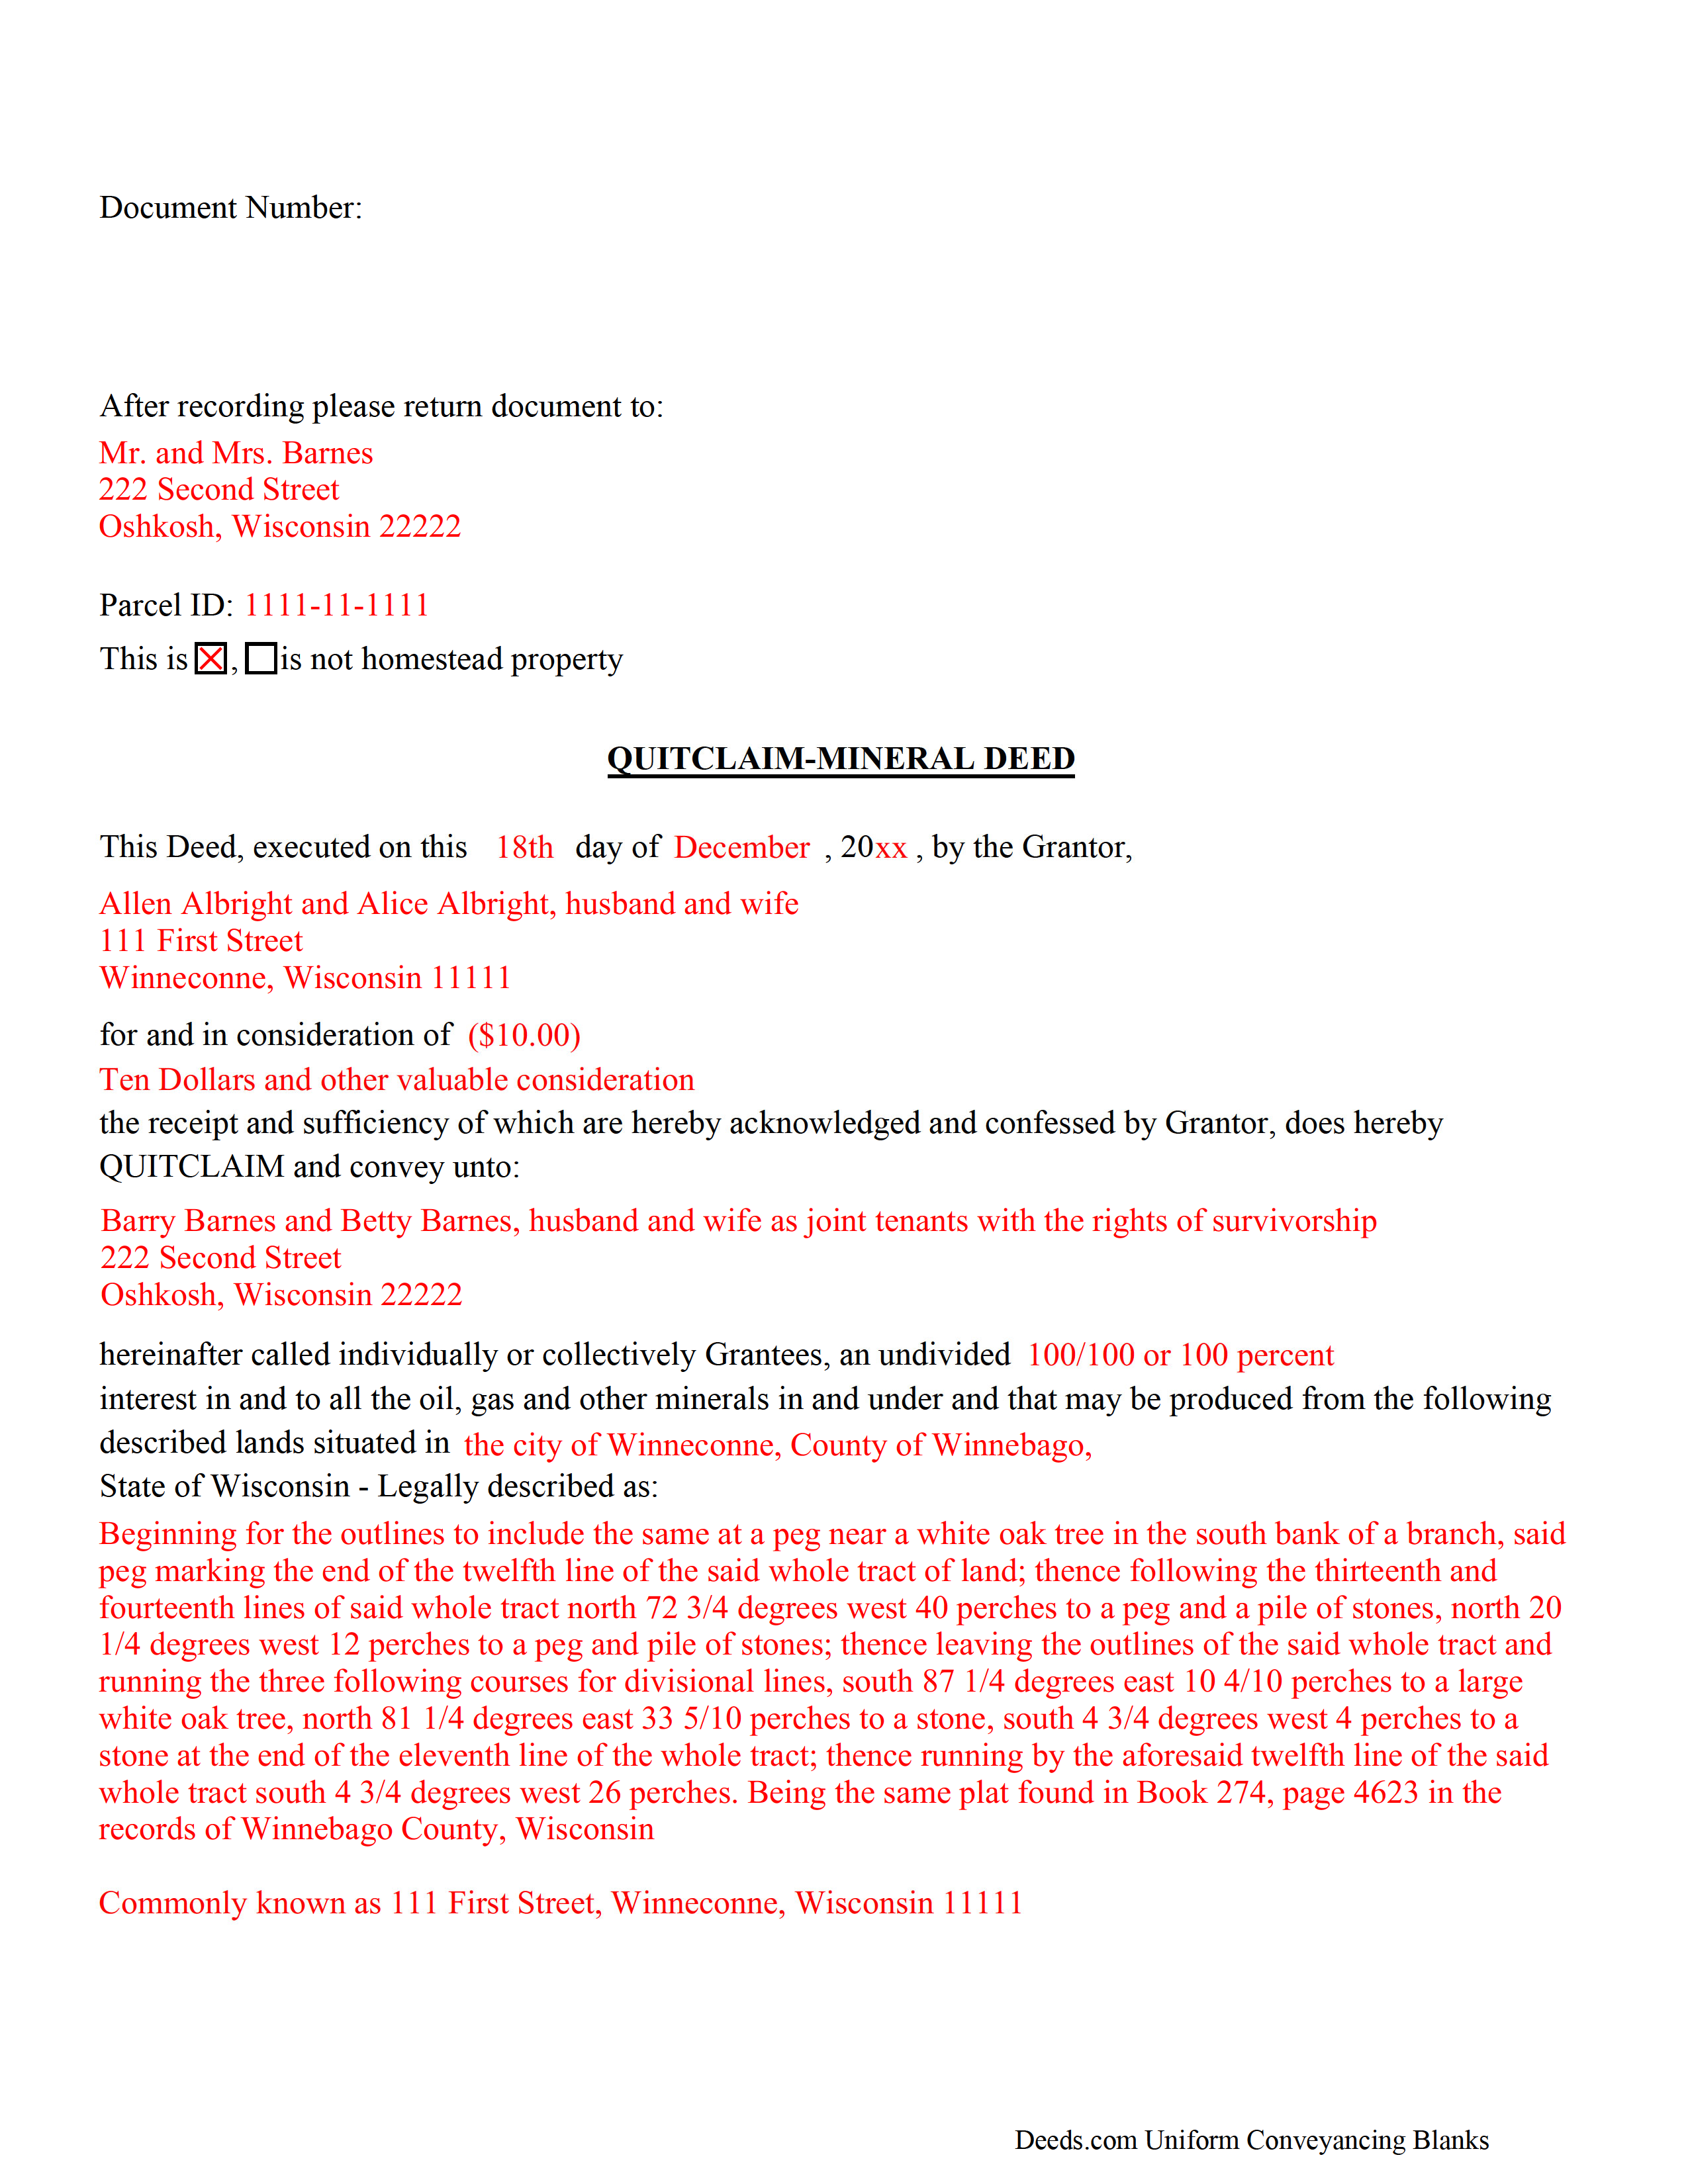 Completed Example of the Mineral Deed with Quitclaim Covenants Document